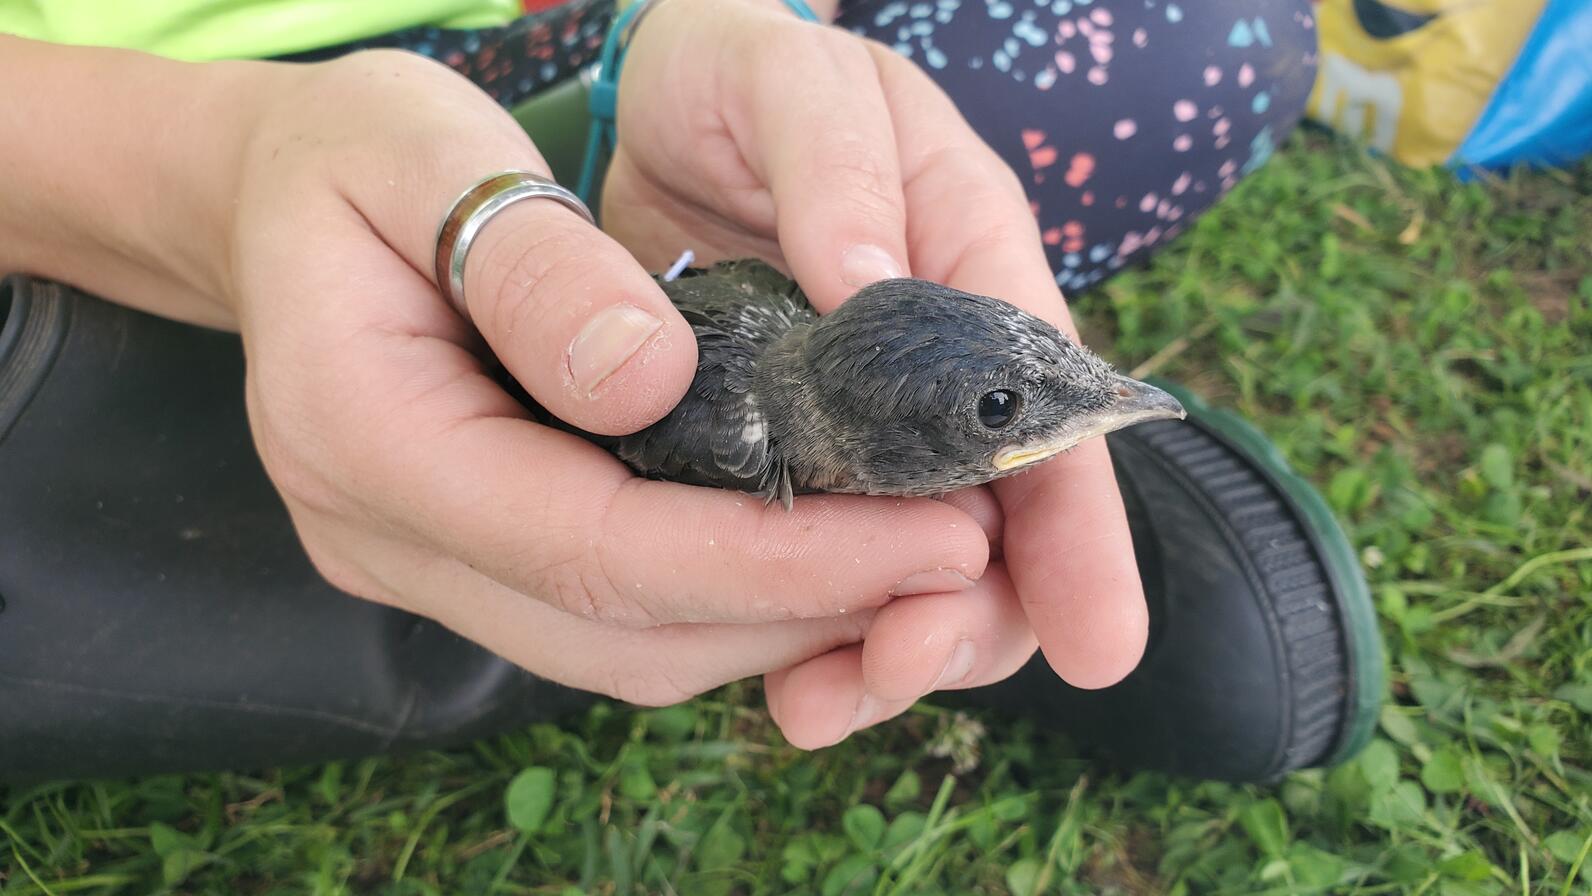 Small bird in someone's hands